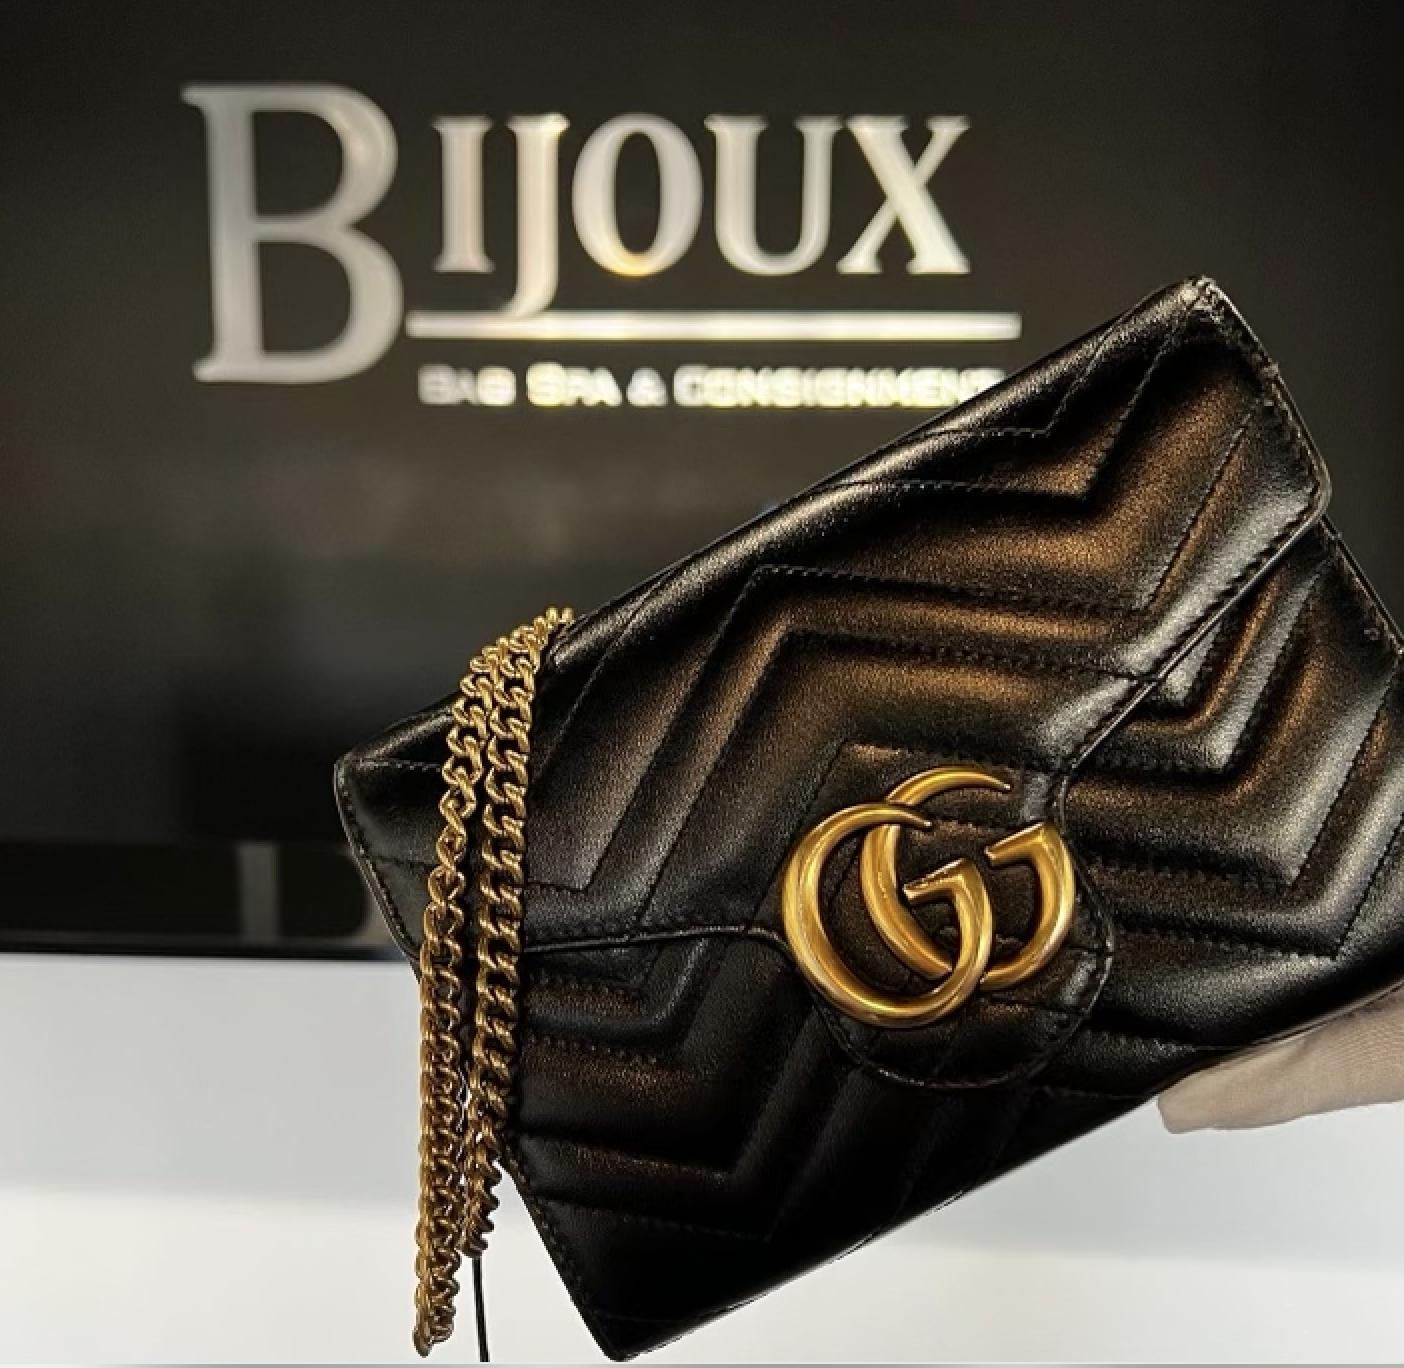 Gucci Marmont Wallet on Chain - Bijoux Bag Spa & Consignment